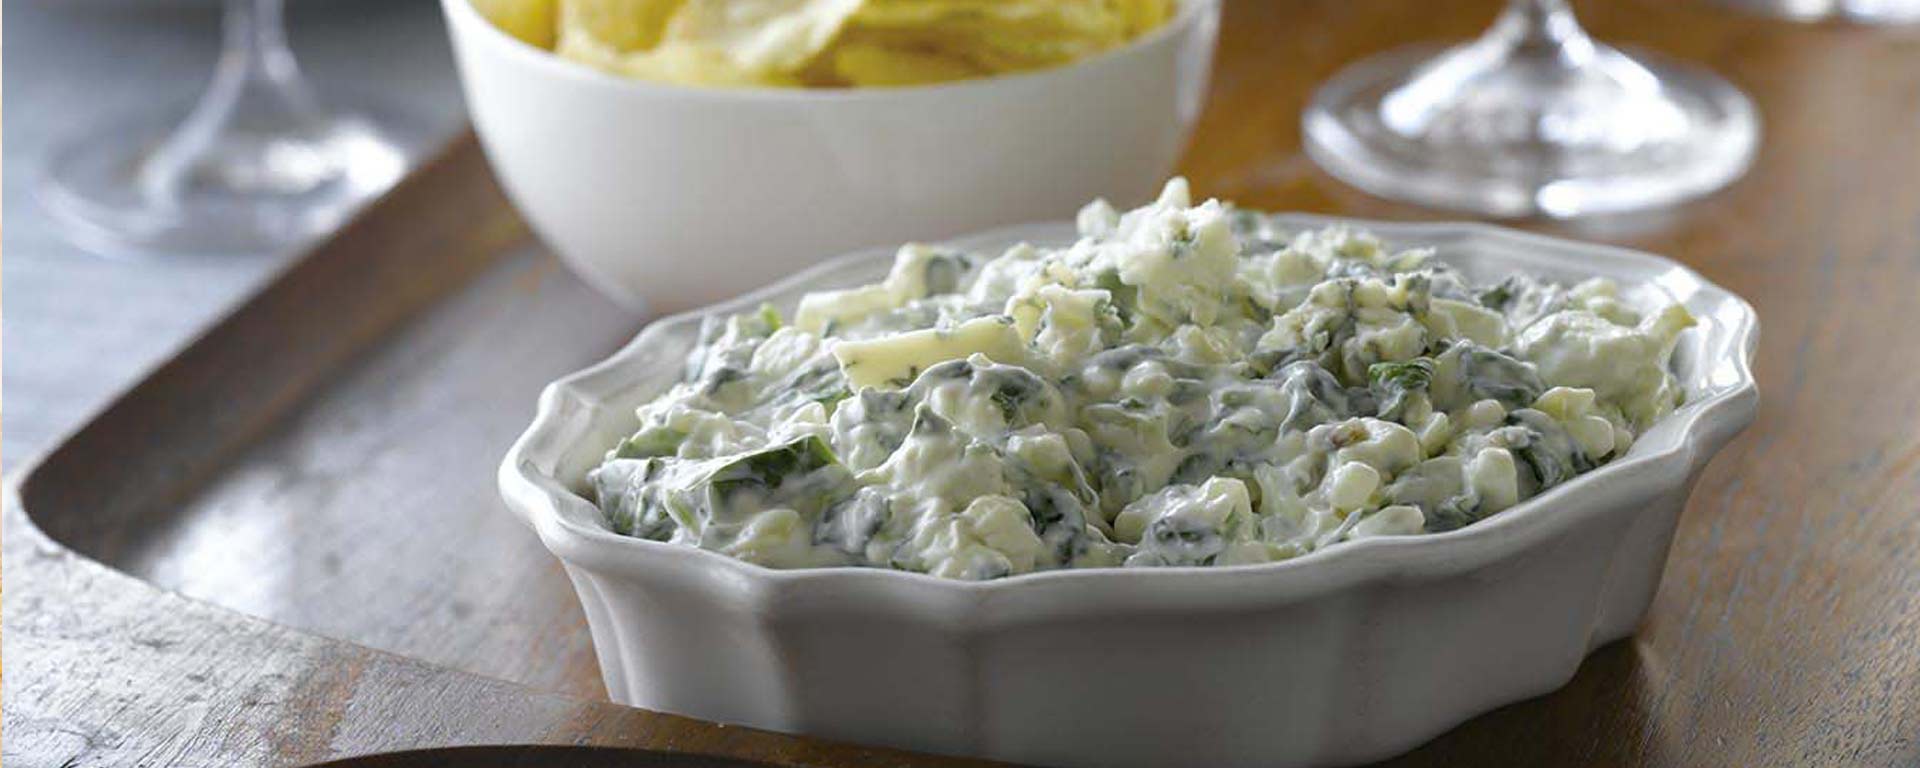 Photo of - Canadian Blue Cheese and Spinach Dip